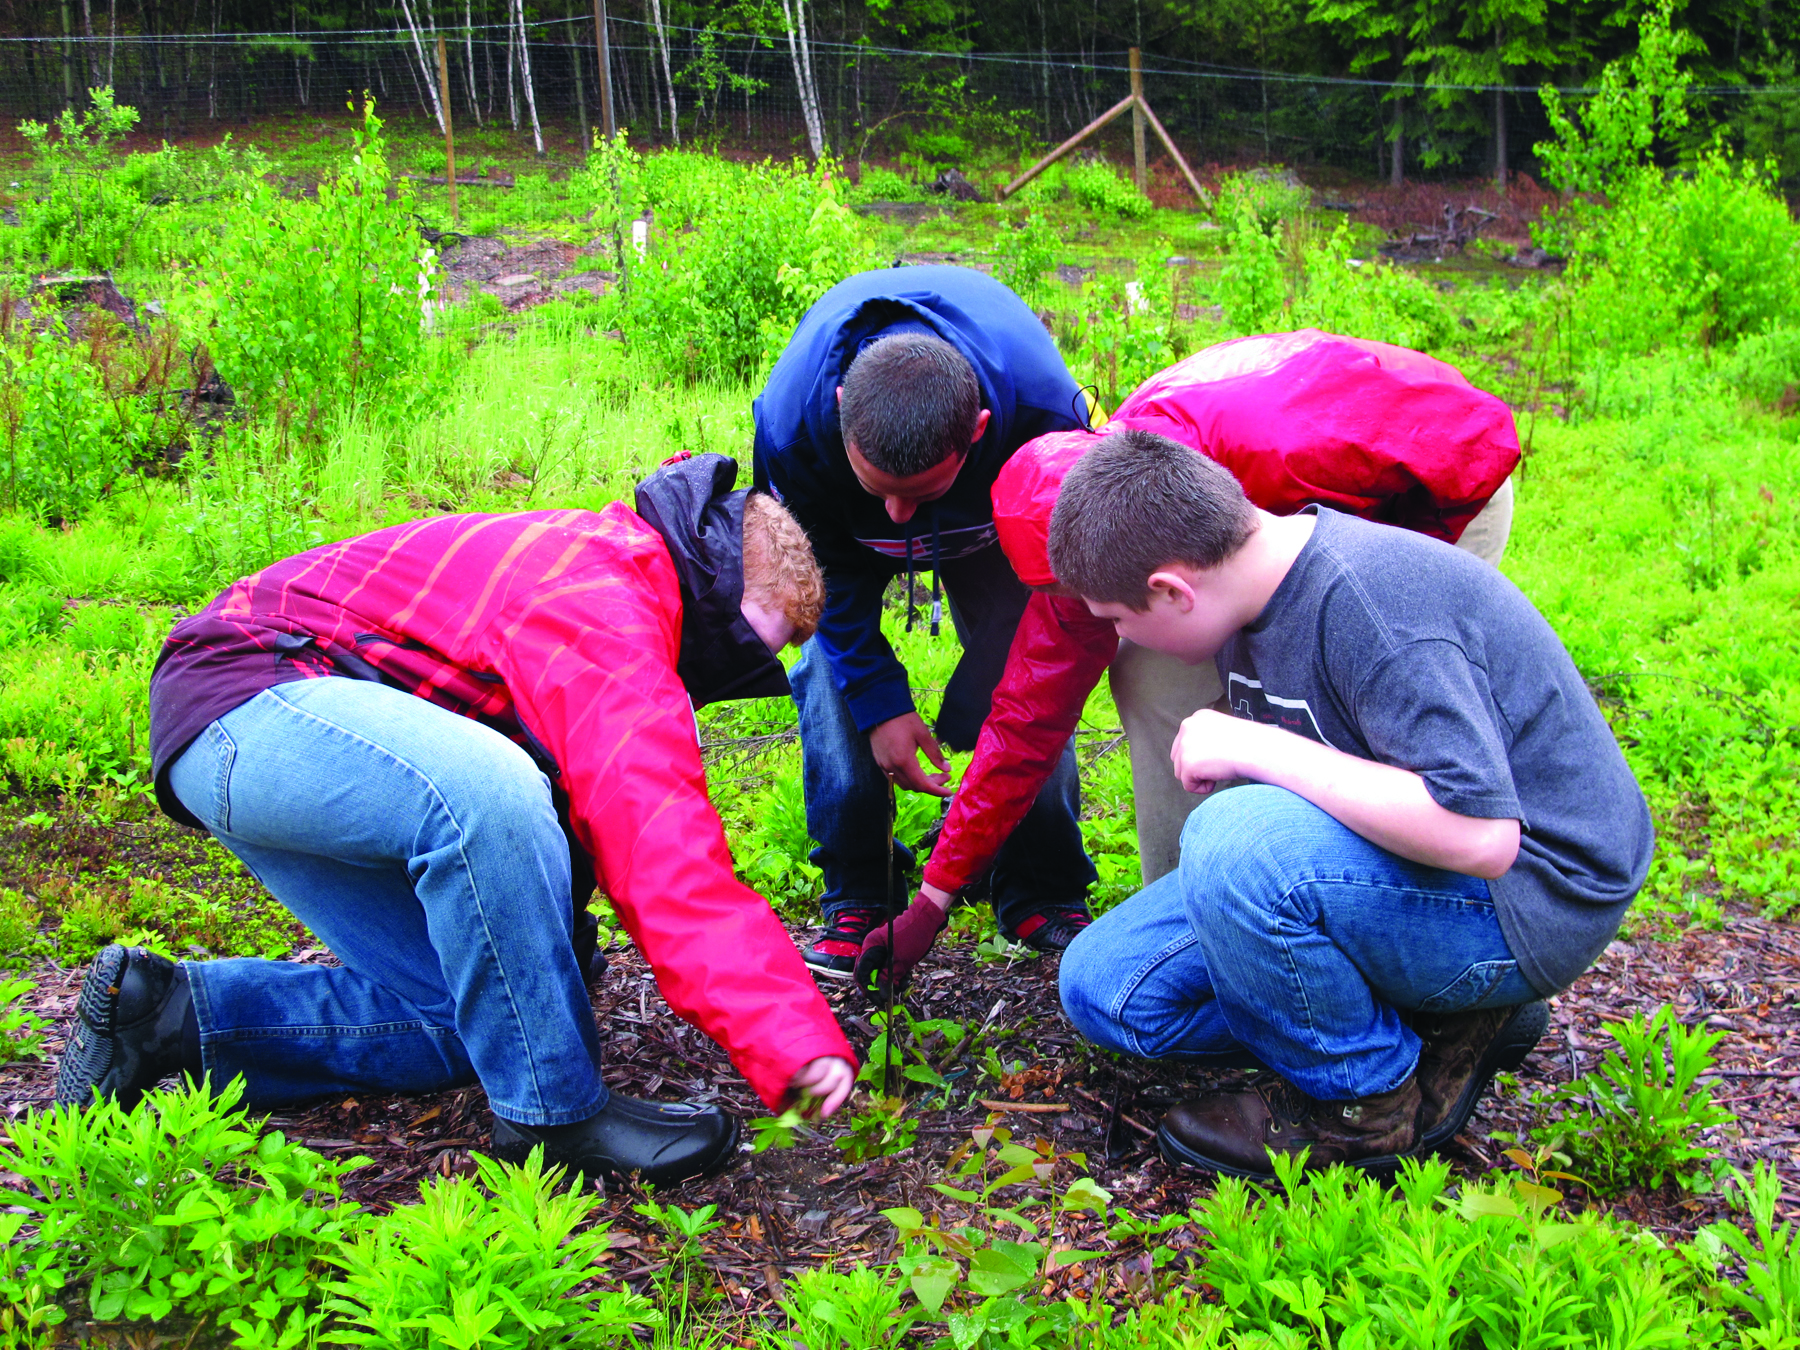 A group of 8th graders weed the vegetable beds at Otter Brook Farm on Stewardship Day. (photo © Brett Amy Thelen)